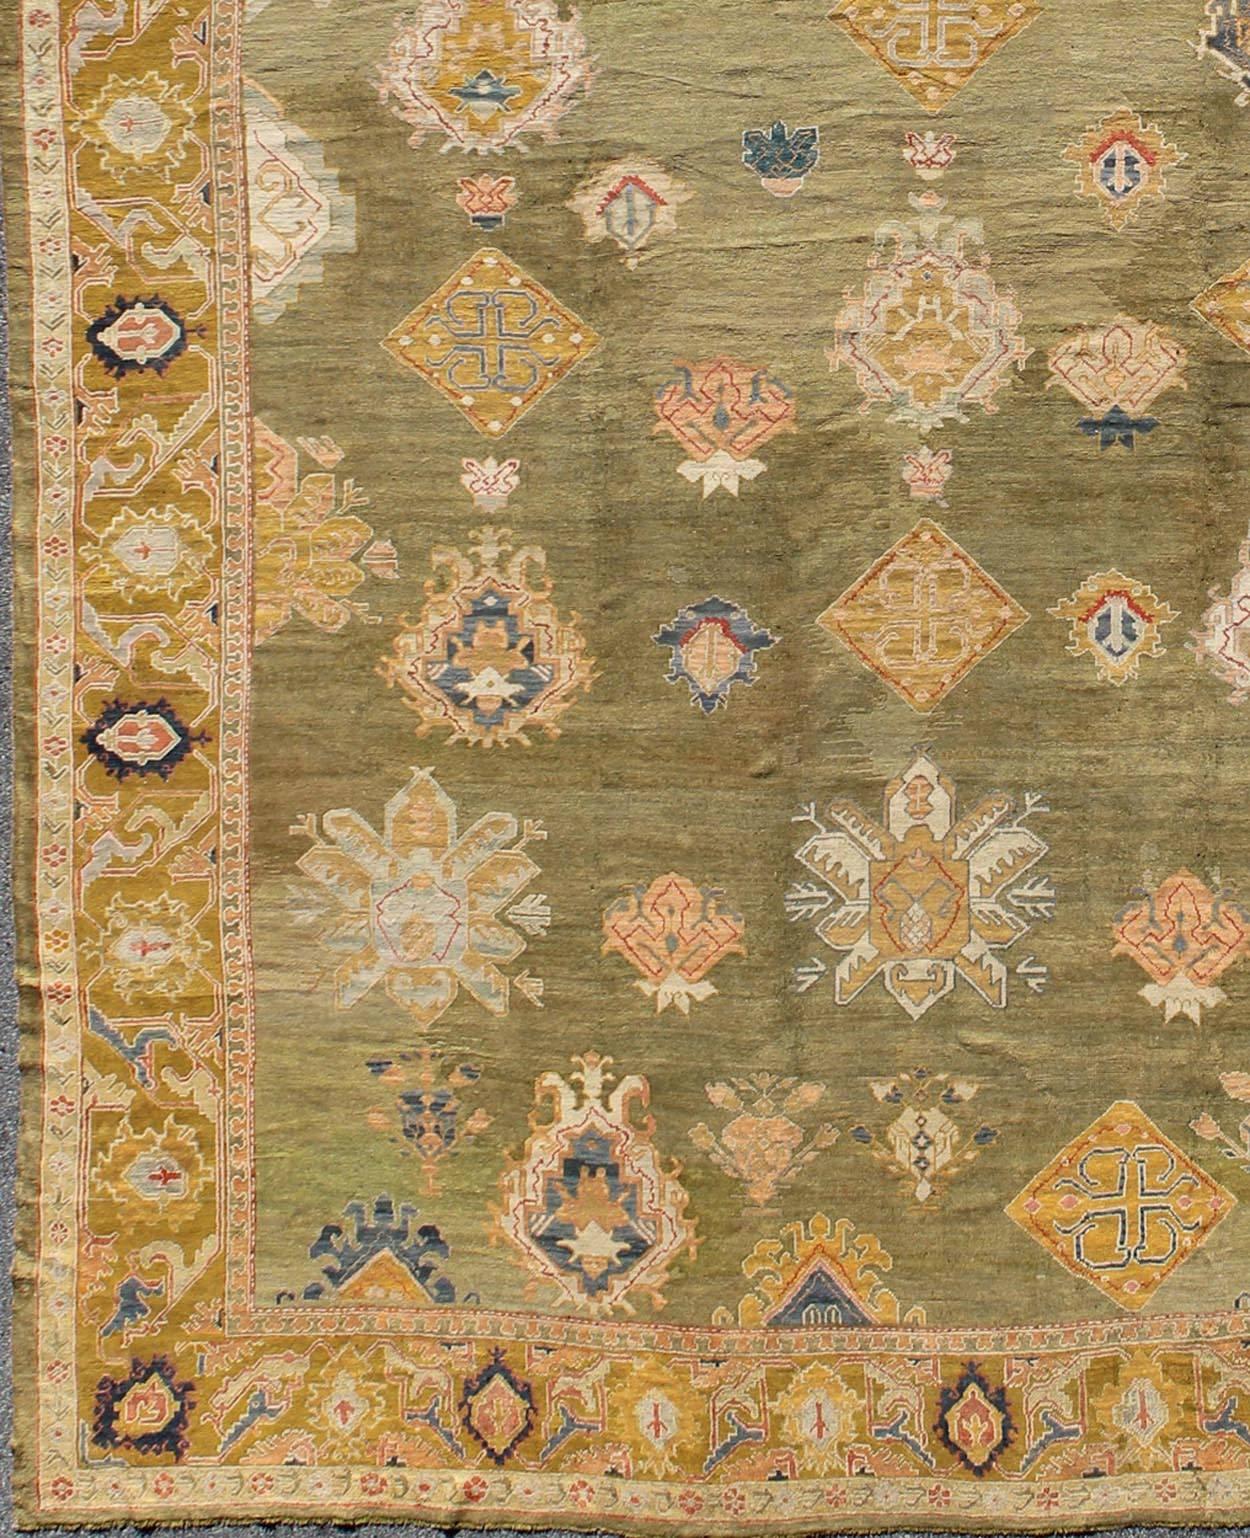 This elegant antique Oushak carpet, of considerably ample size, dates back to around the end of the 19th Century and beautifully illustrates the impeccable craftsmanship and artistry of Oushak weavers. Sumptuously soft woolen threads of green, gold,